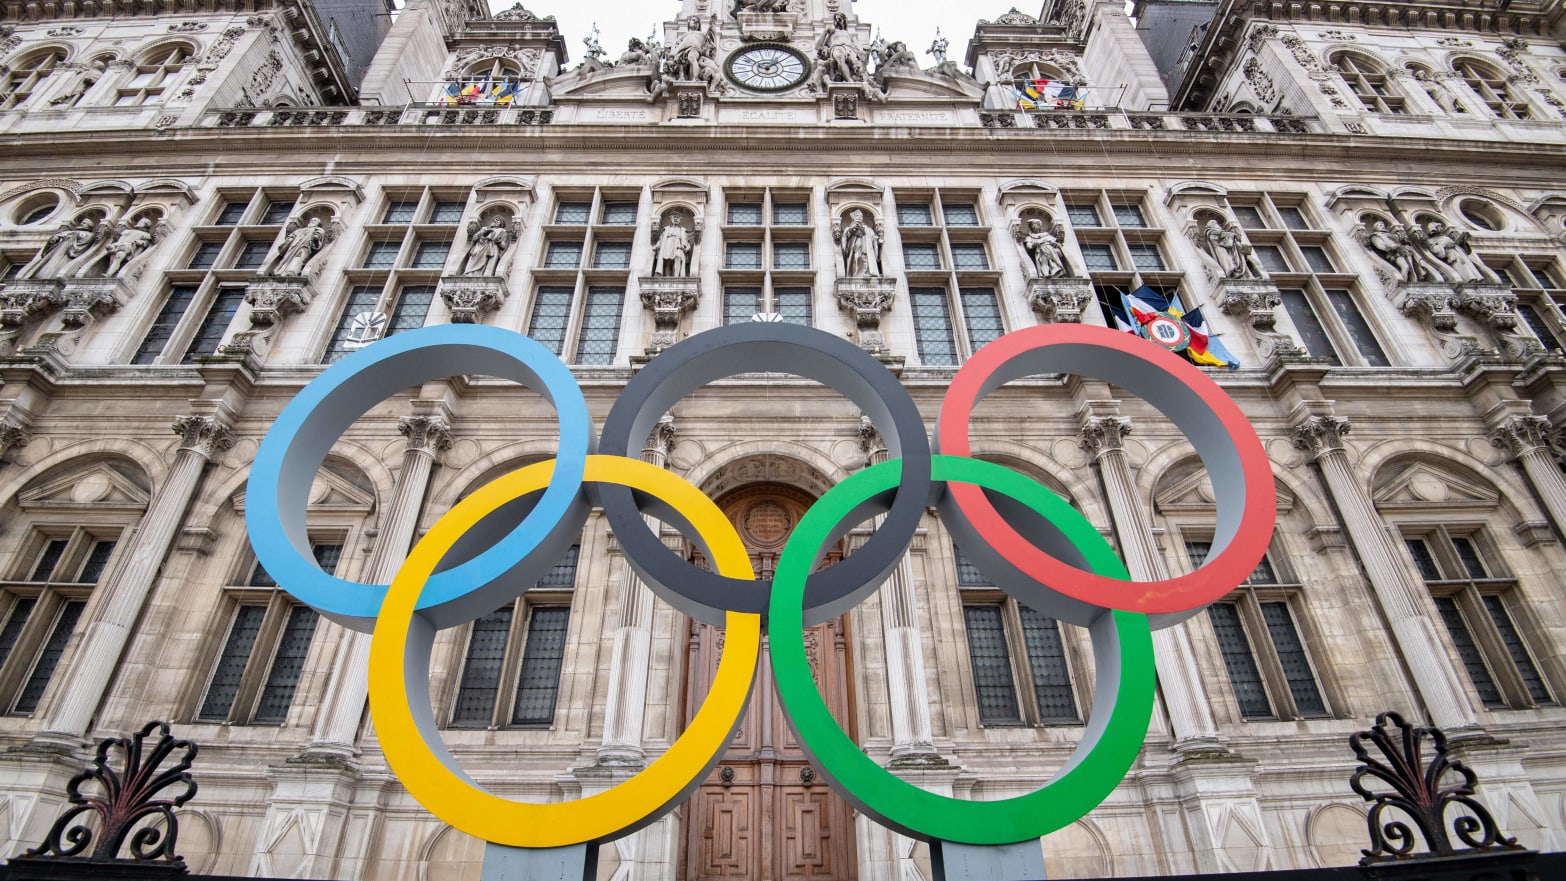 This general view shows the Olympic rings on display in front of The City Hall in Paris on March 13, 2023, ahead of the 2024 Olympic Games.